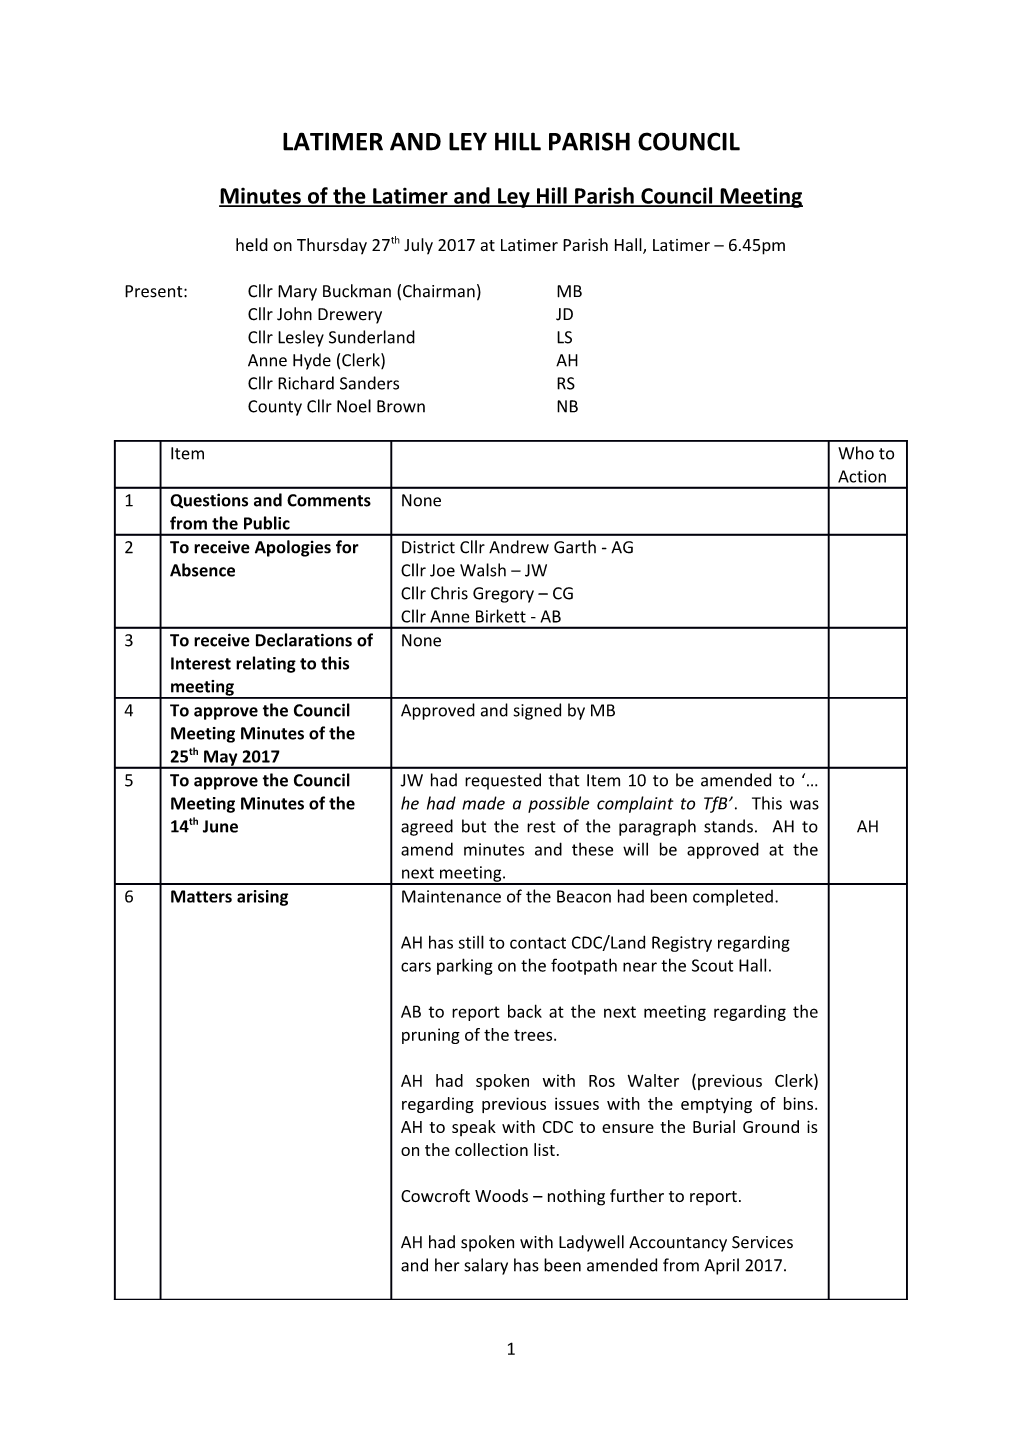 Minutes of the Latimer and Ley Hill Parish Council Meeting